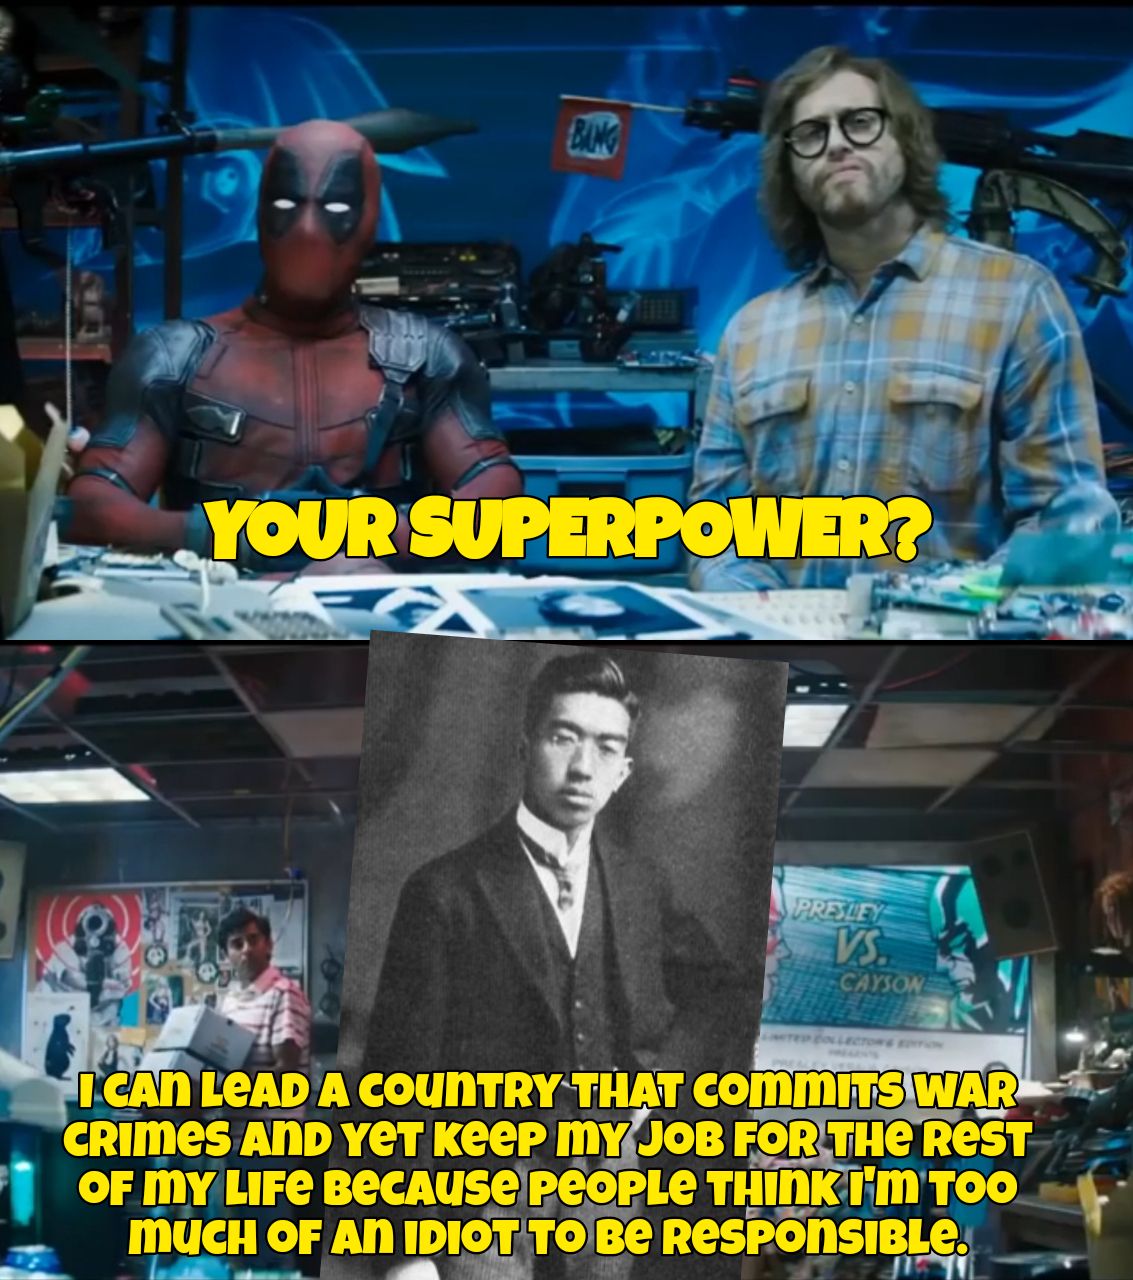 To be fair... it's a pretty good superpower Hirohito.